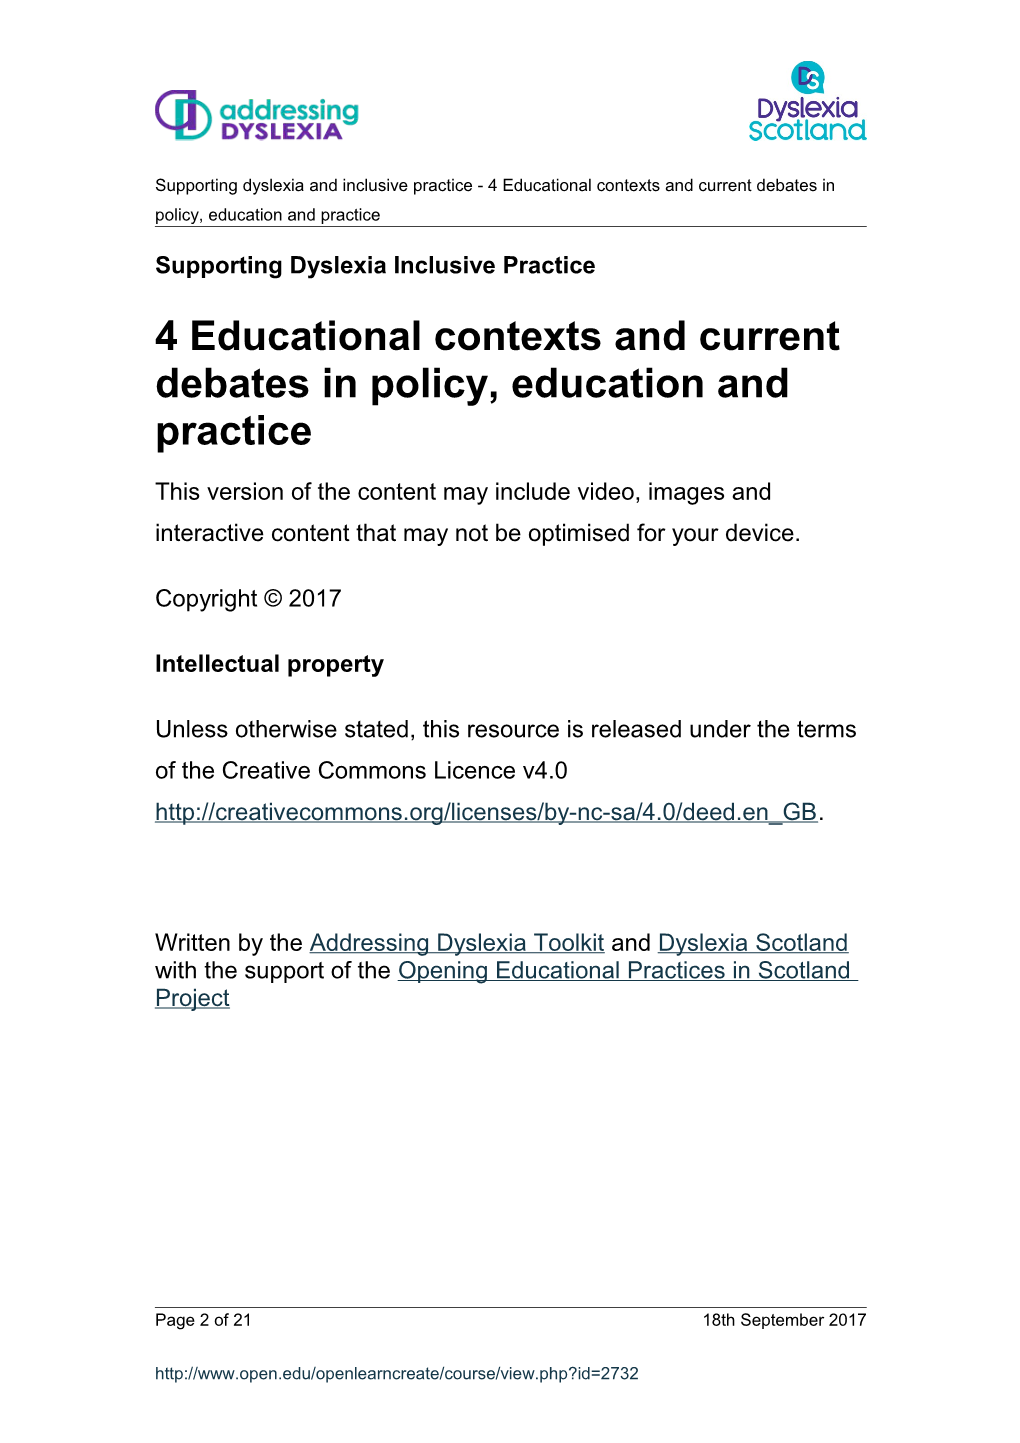 4 Educational Contexts and Current Debates in Policy, Education and Practice